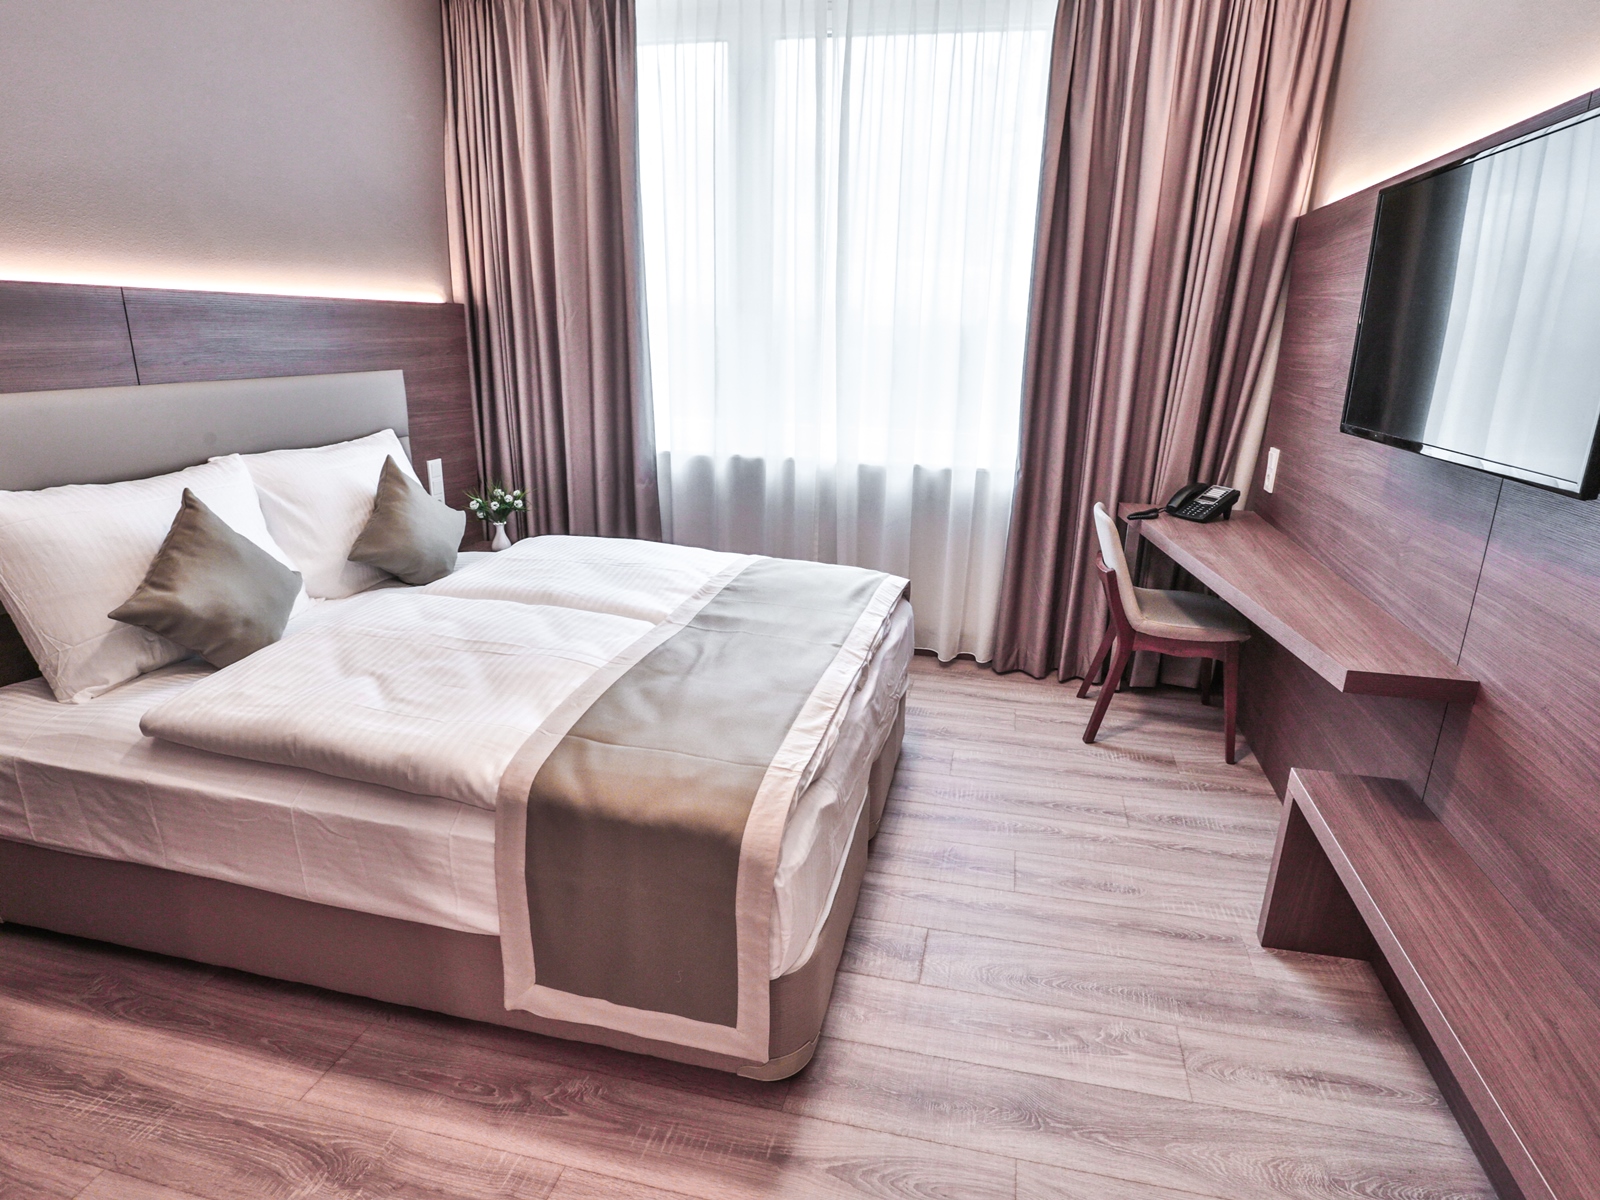 Ocak Apartment and Hotel <br/>66.67 ew <br/> <a href='http://vakantieoplossing.nl/outpage/?id=ad9132ab0a7d98cd128658775bd3b9f5' target='_blank'>View Details</a>